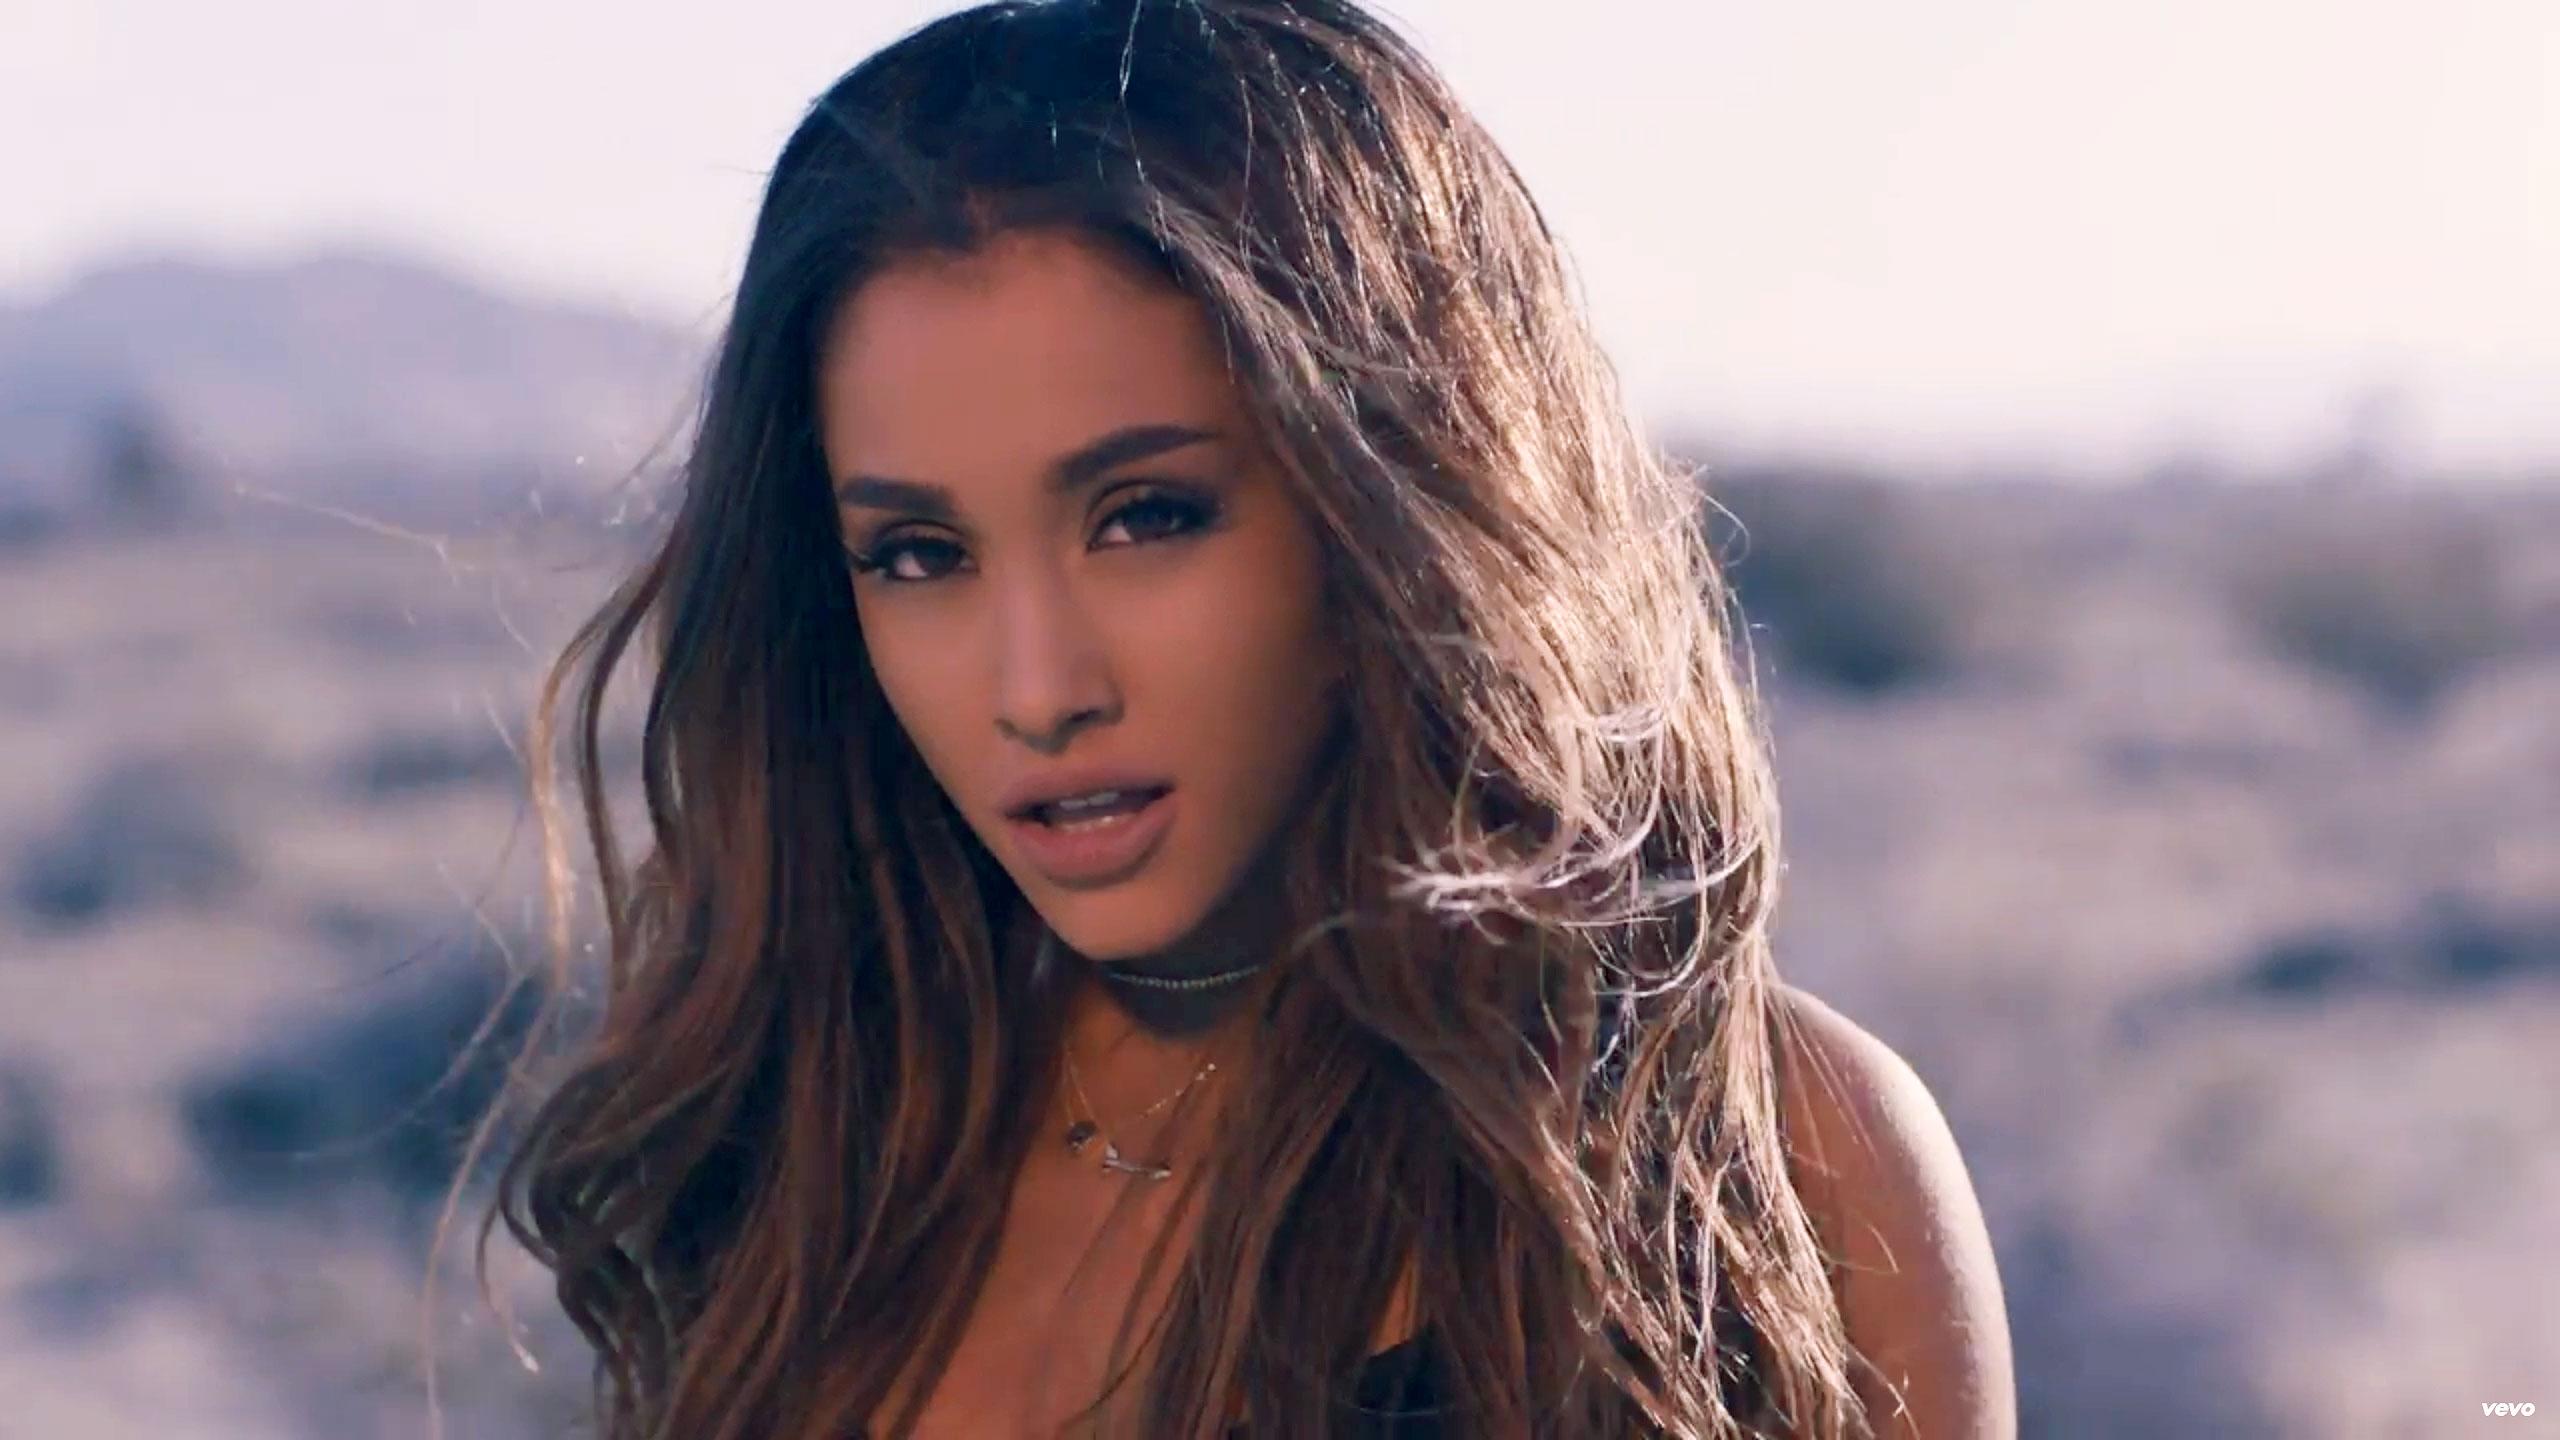 Ariana Grande Lets Hair Down, Wears Short Shorts in 'Into You' Video